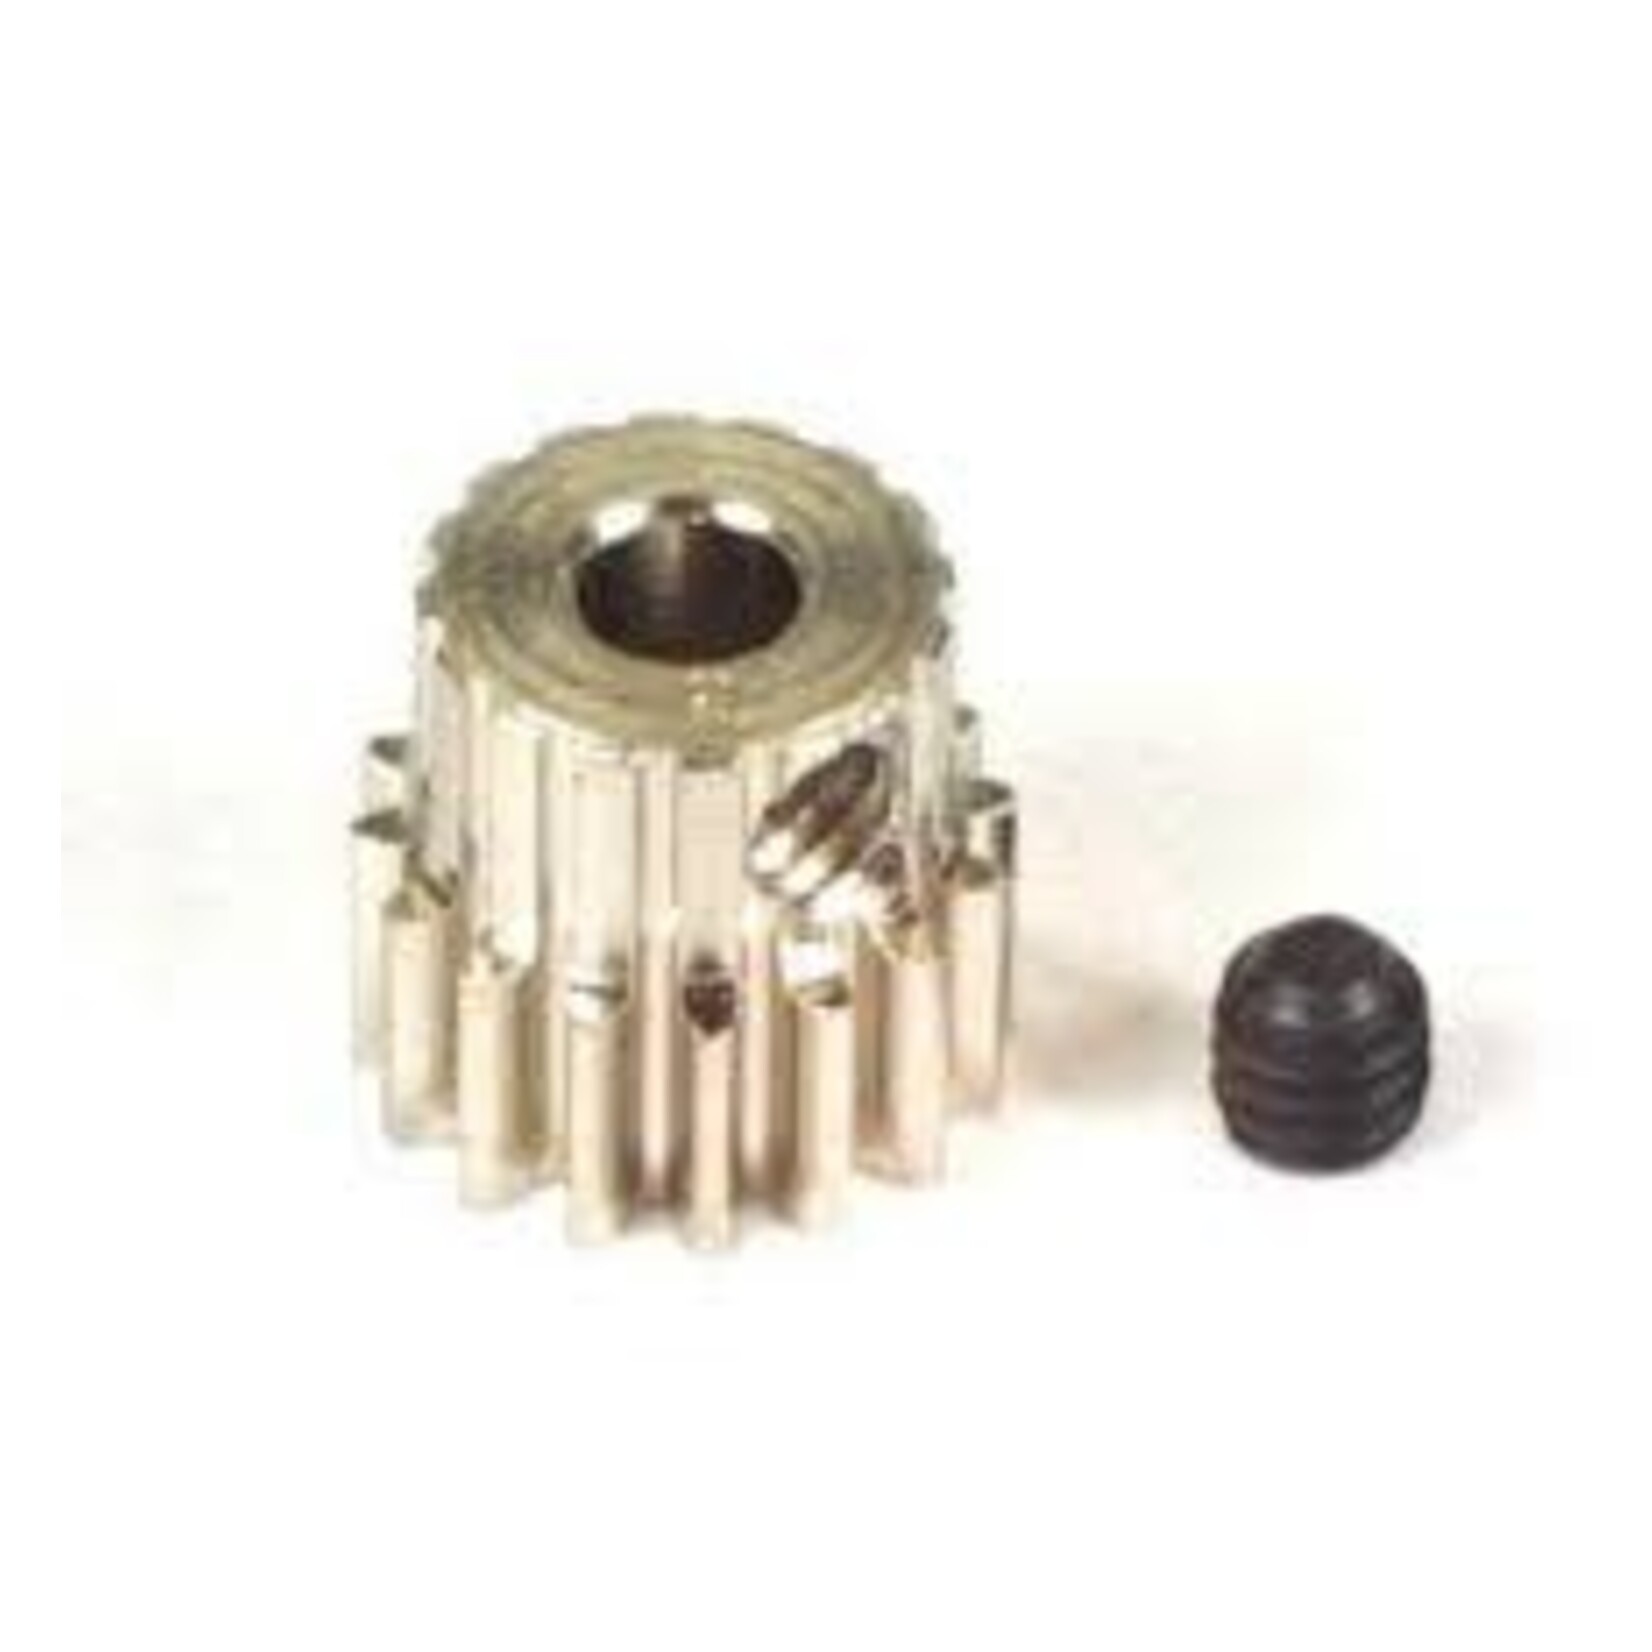 Robinson Racing Products (RRP) 15T 0.6 mod pinion